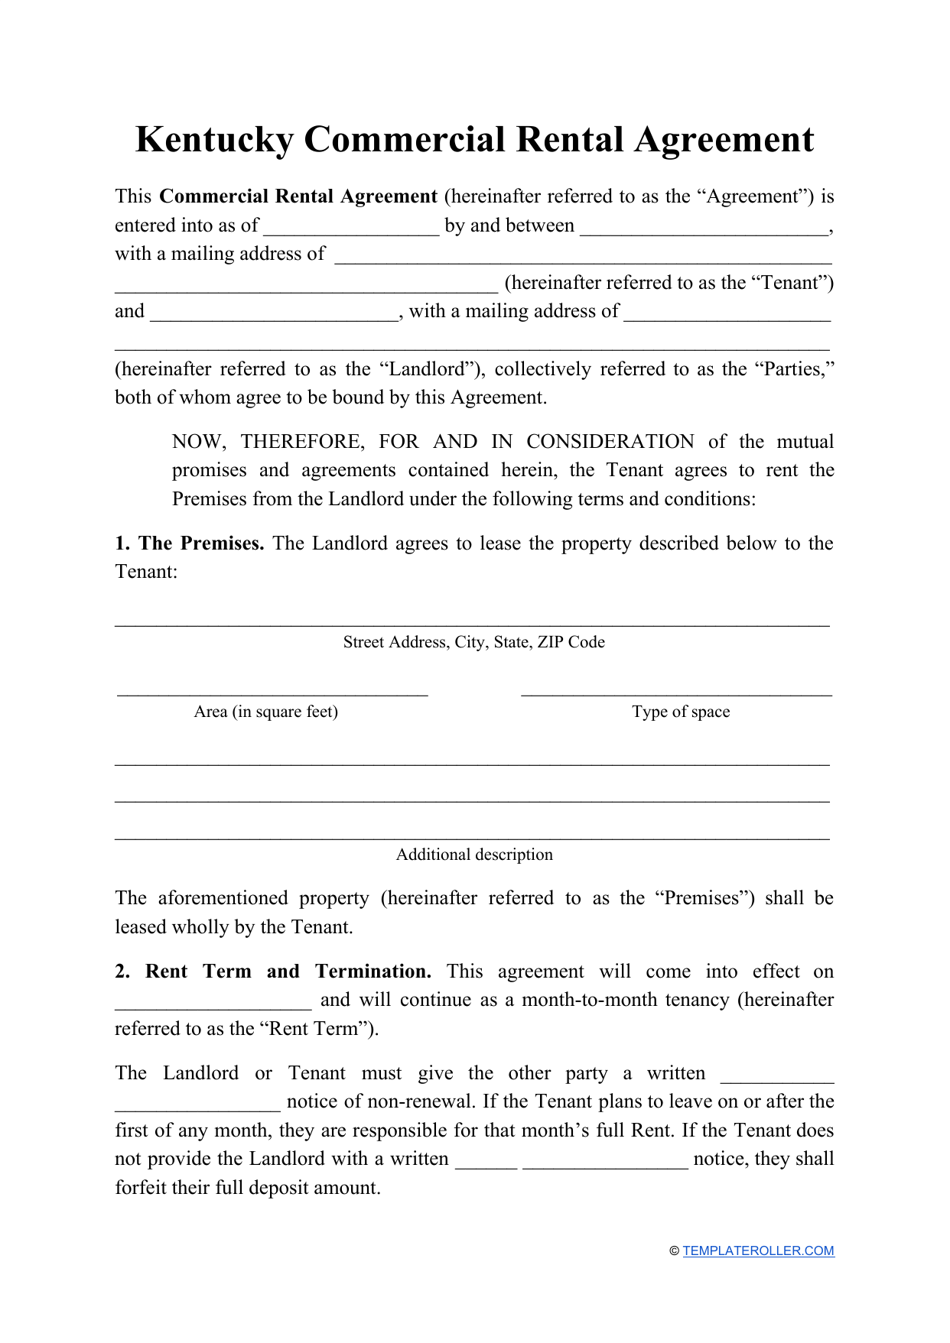 Commercial Rental Agreement Template - Kentucky, Page 1